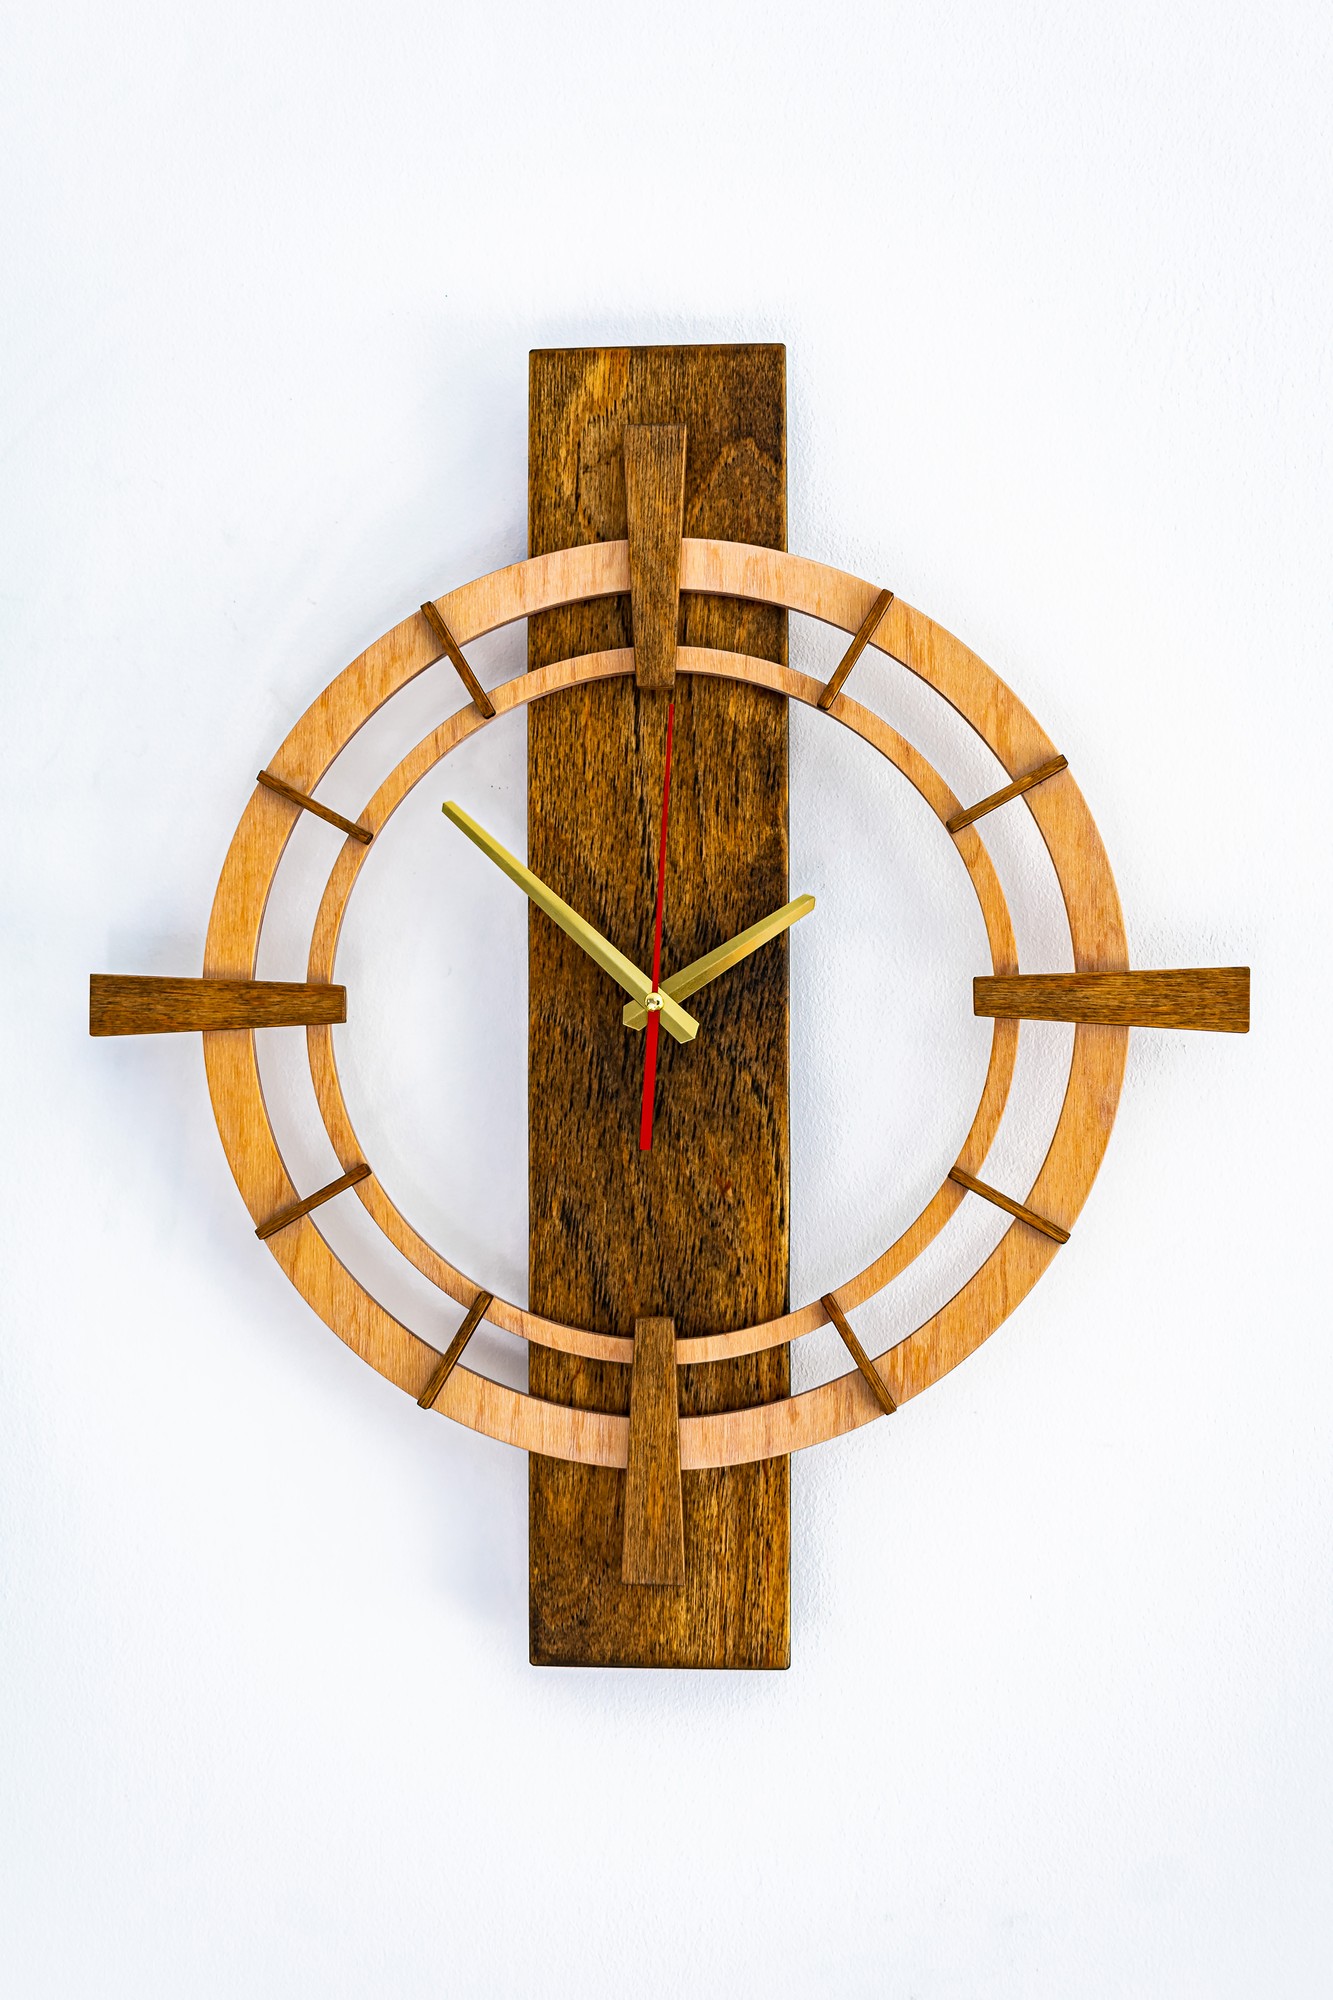 Wall clock made of wood, height 50cm, covered with linseed oil and beeswax